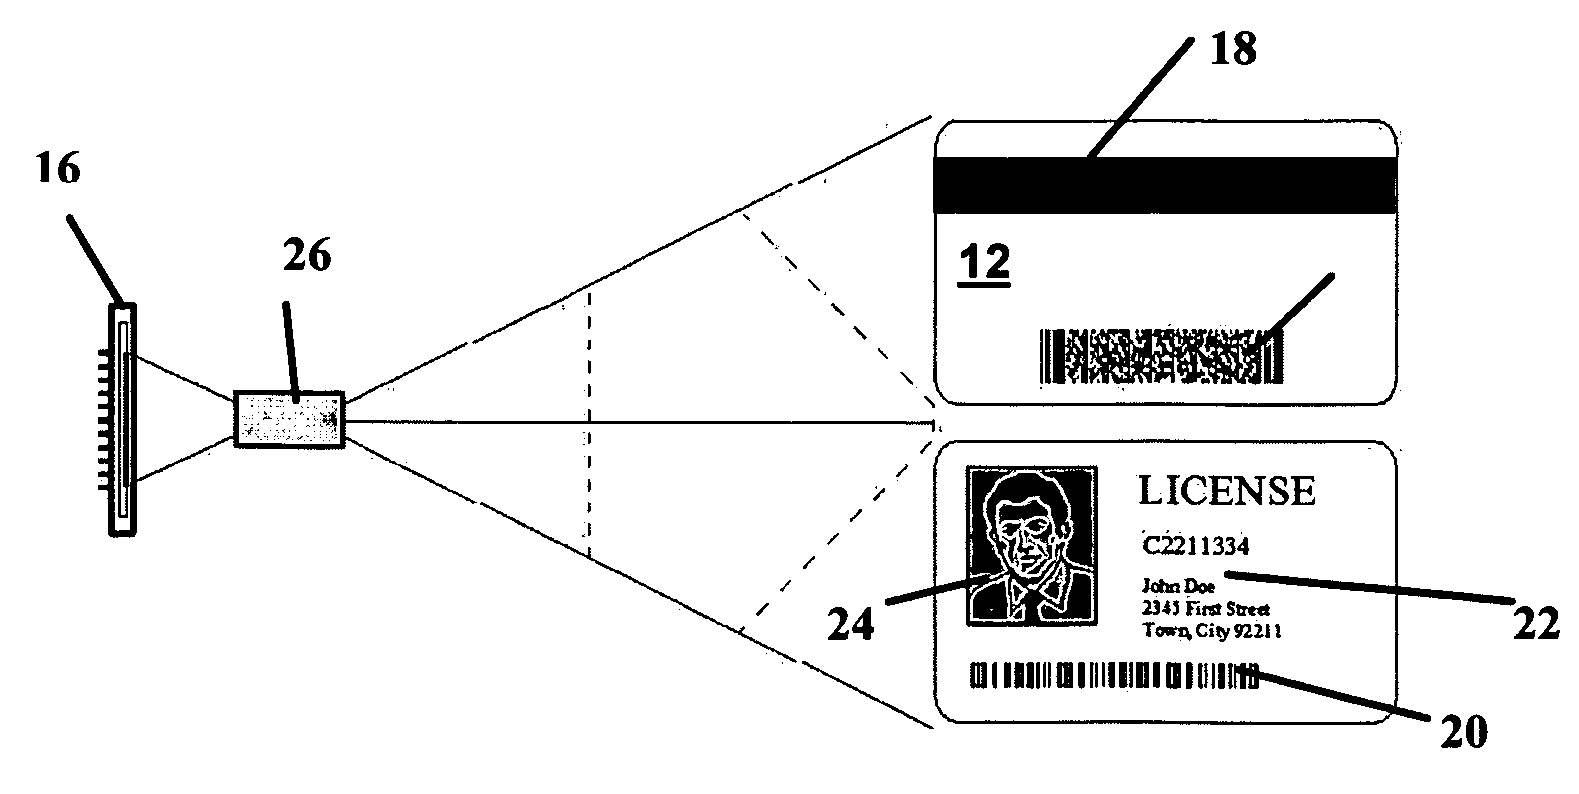 Imaging device and method for concurrent imaging of opposite sides of an identification card or document